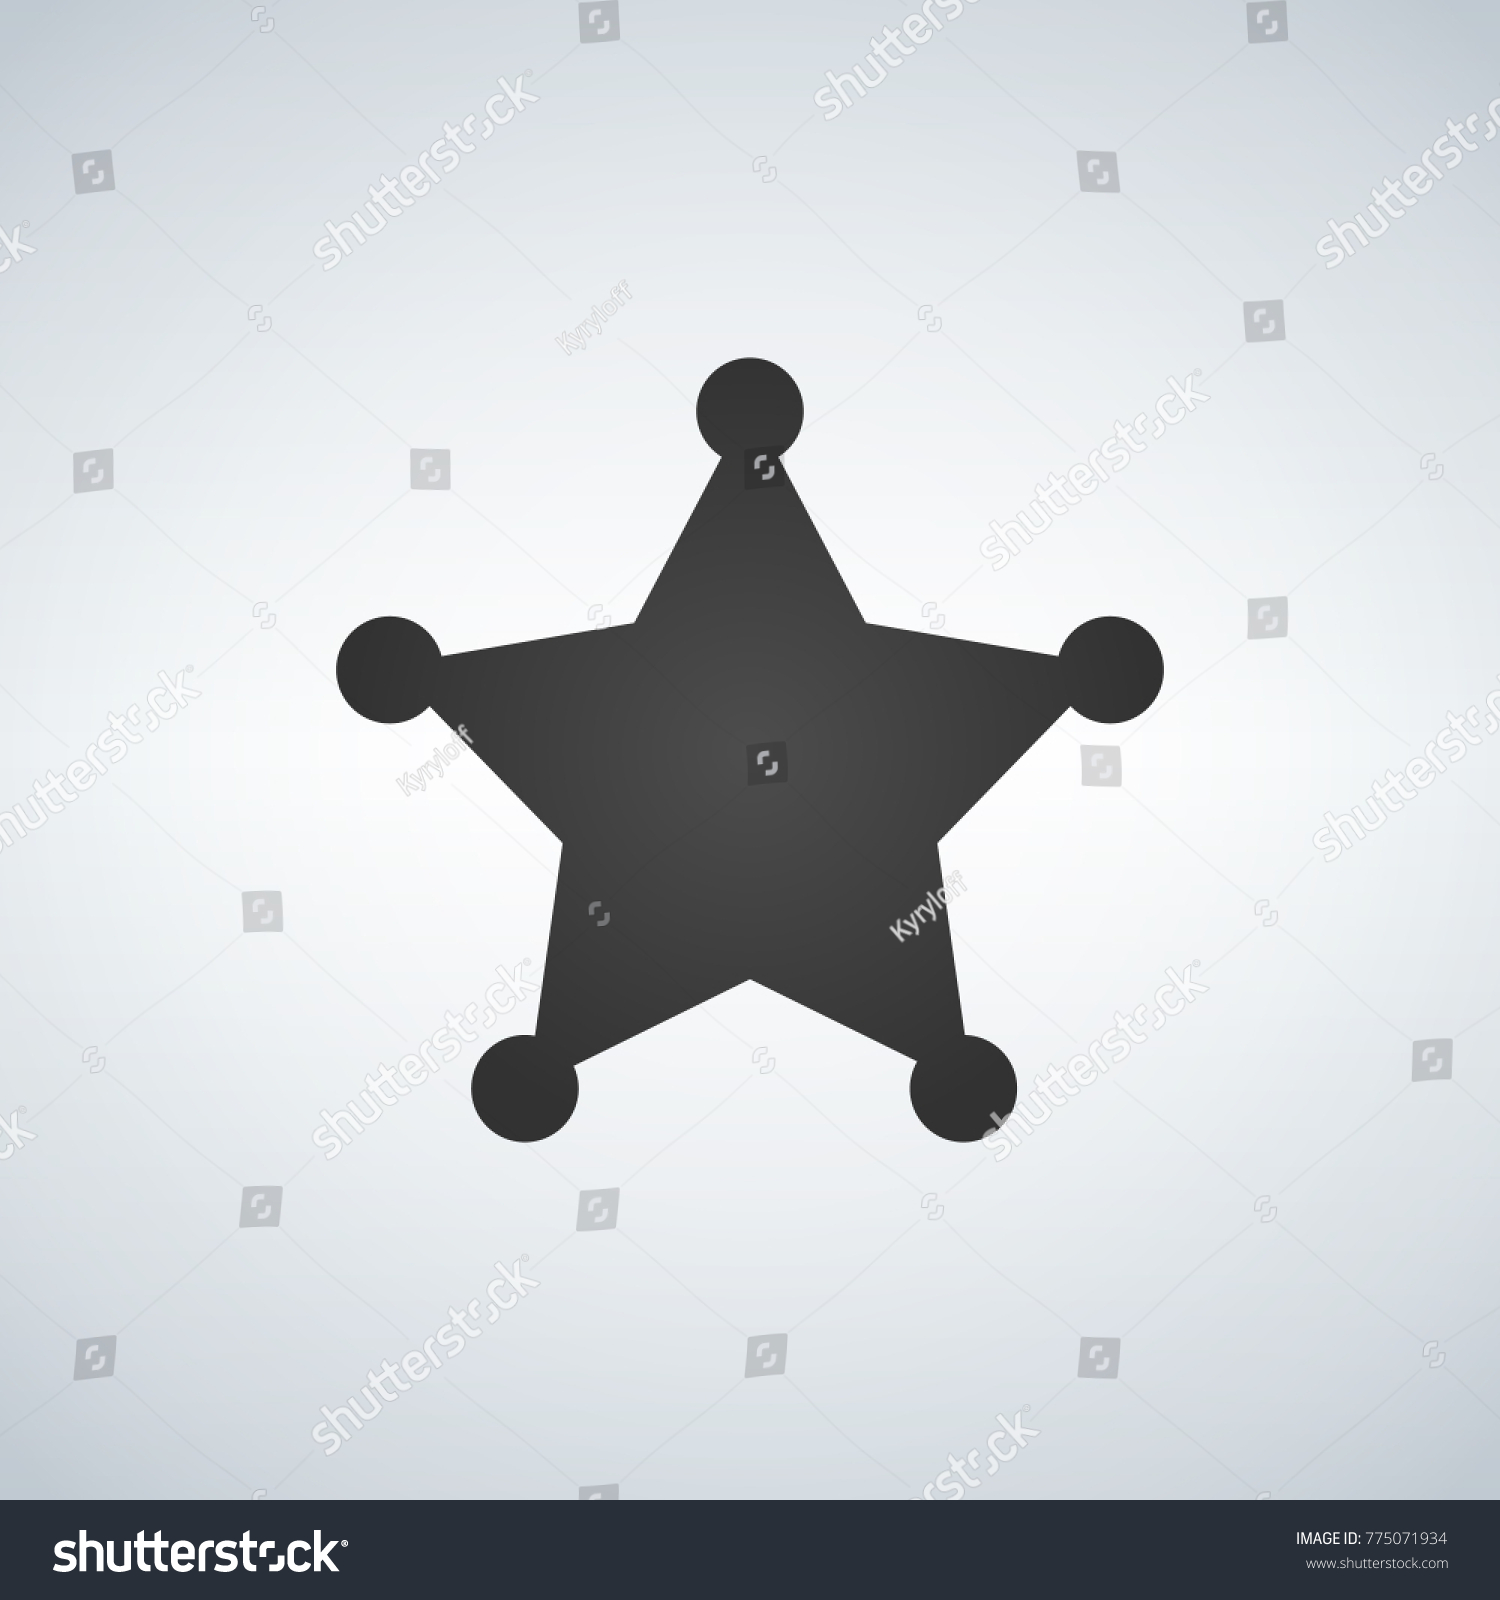 SVG of Sheriff blank star black symbol. Simple silhouette. Template. Vector illustration isolated on white background. svg